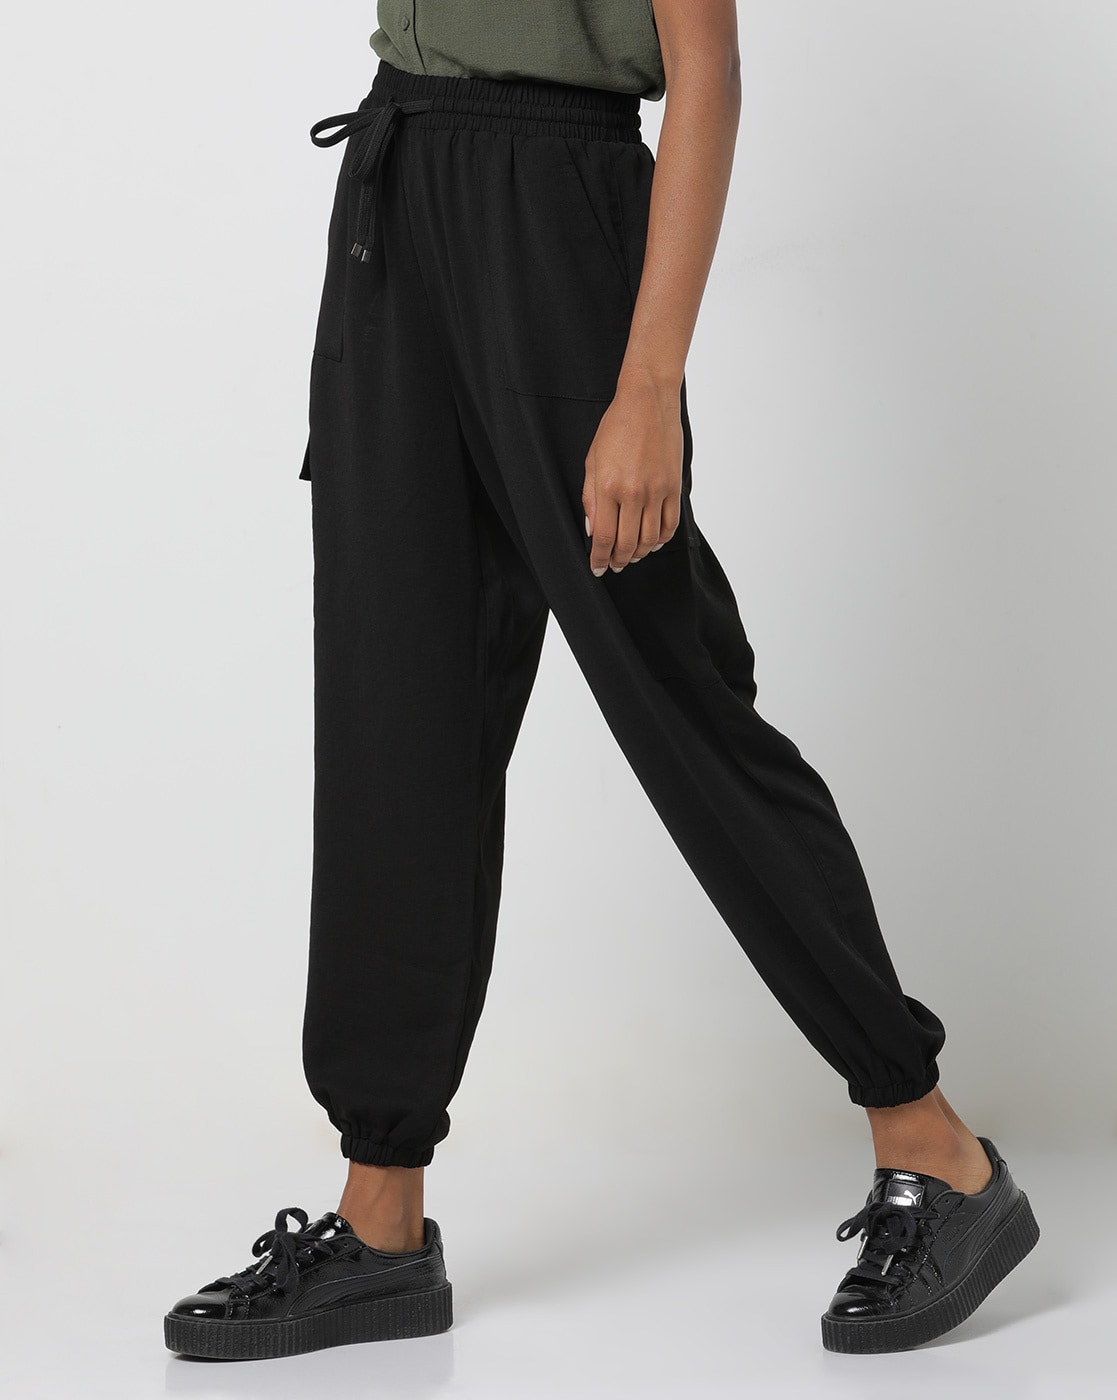 Buy Black Trousers & Pants for Women by Kassually Online | Ajio.com